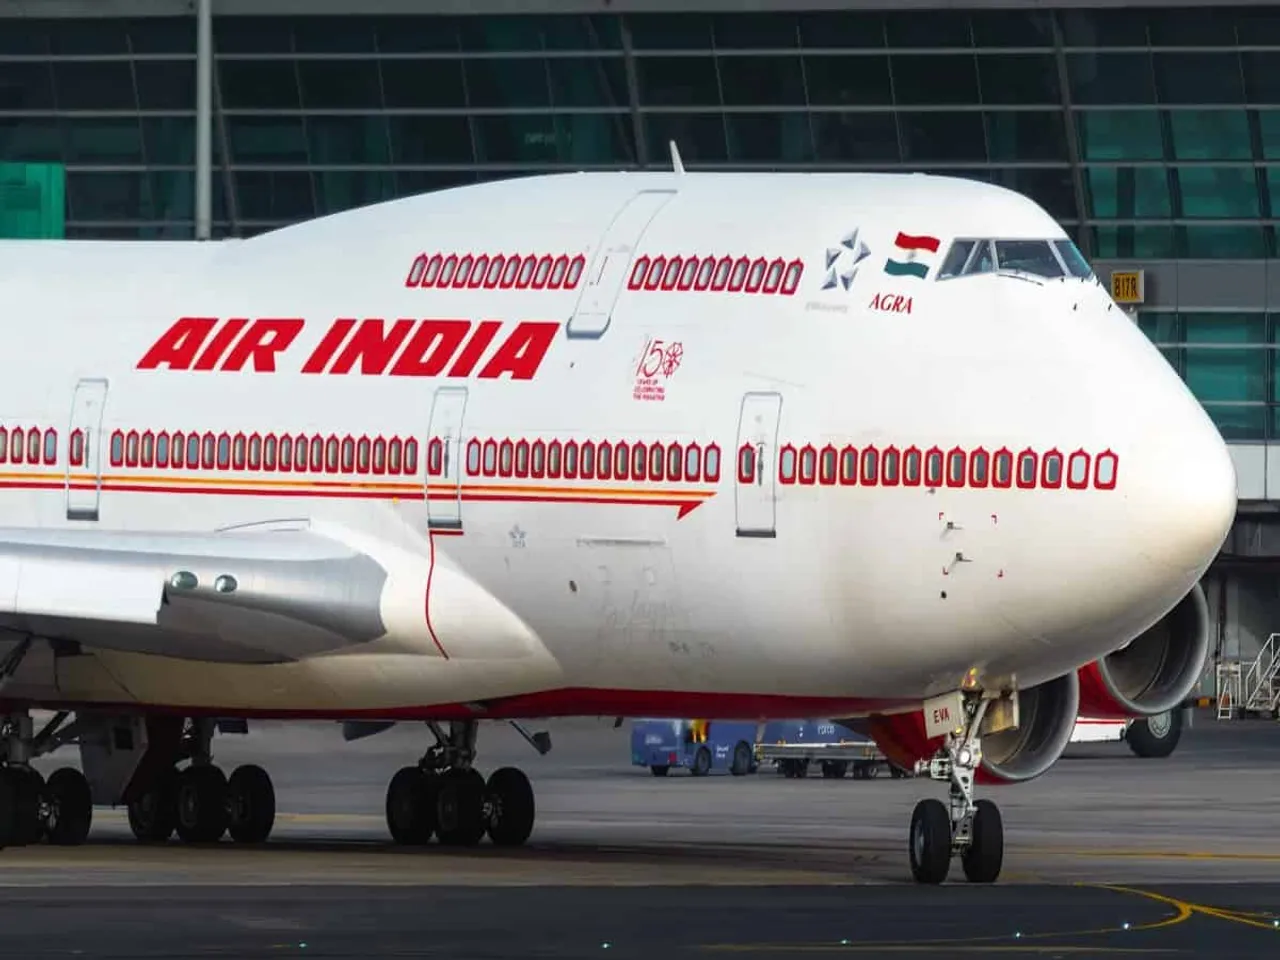 Air India to launch direct flight service from Mumbai to Melbourne on Dec 15